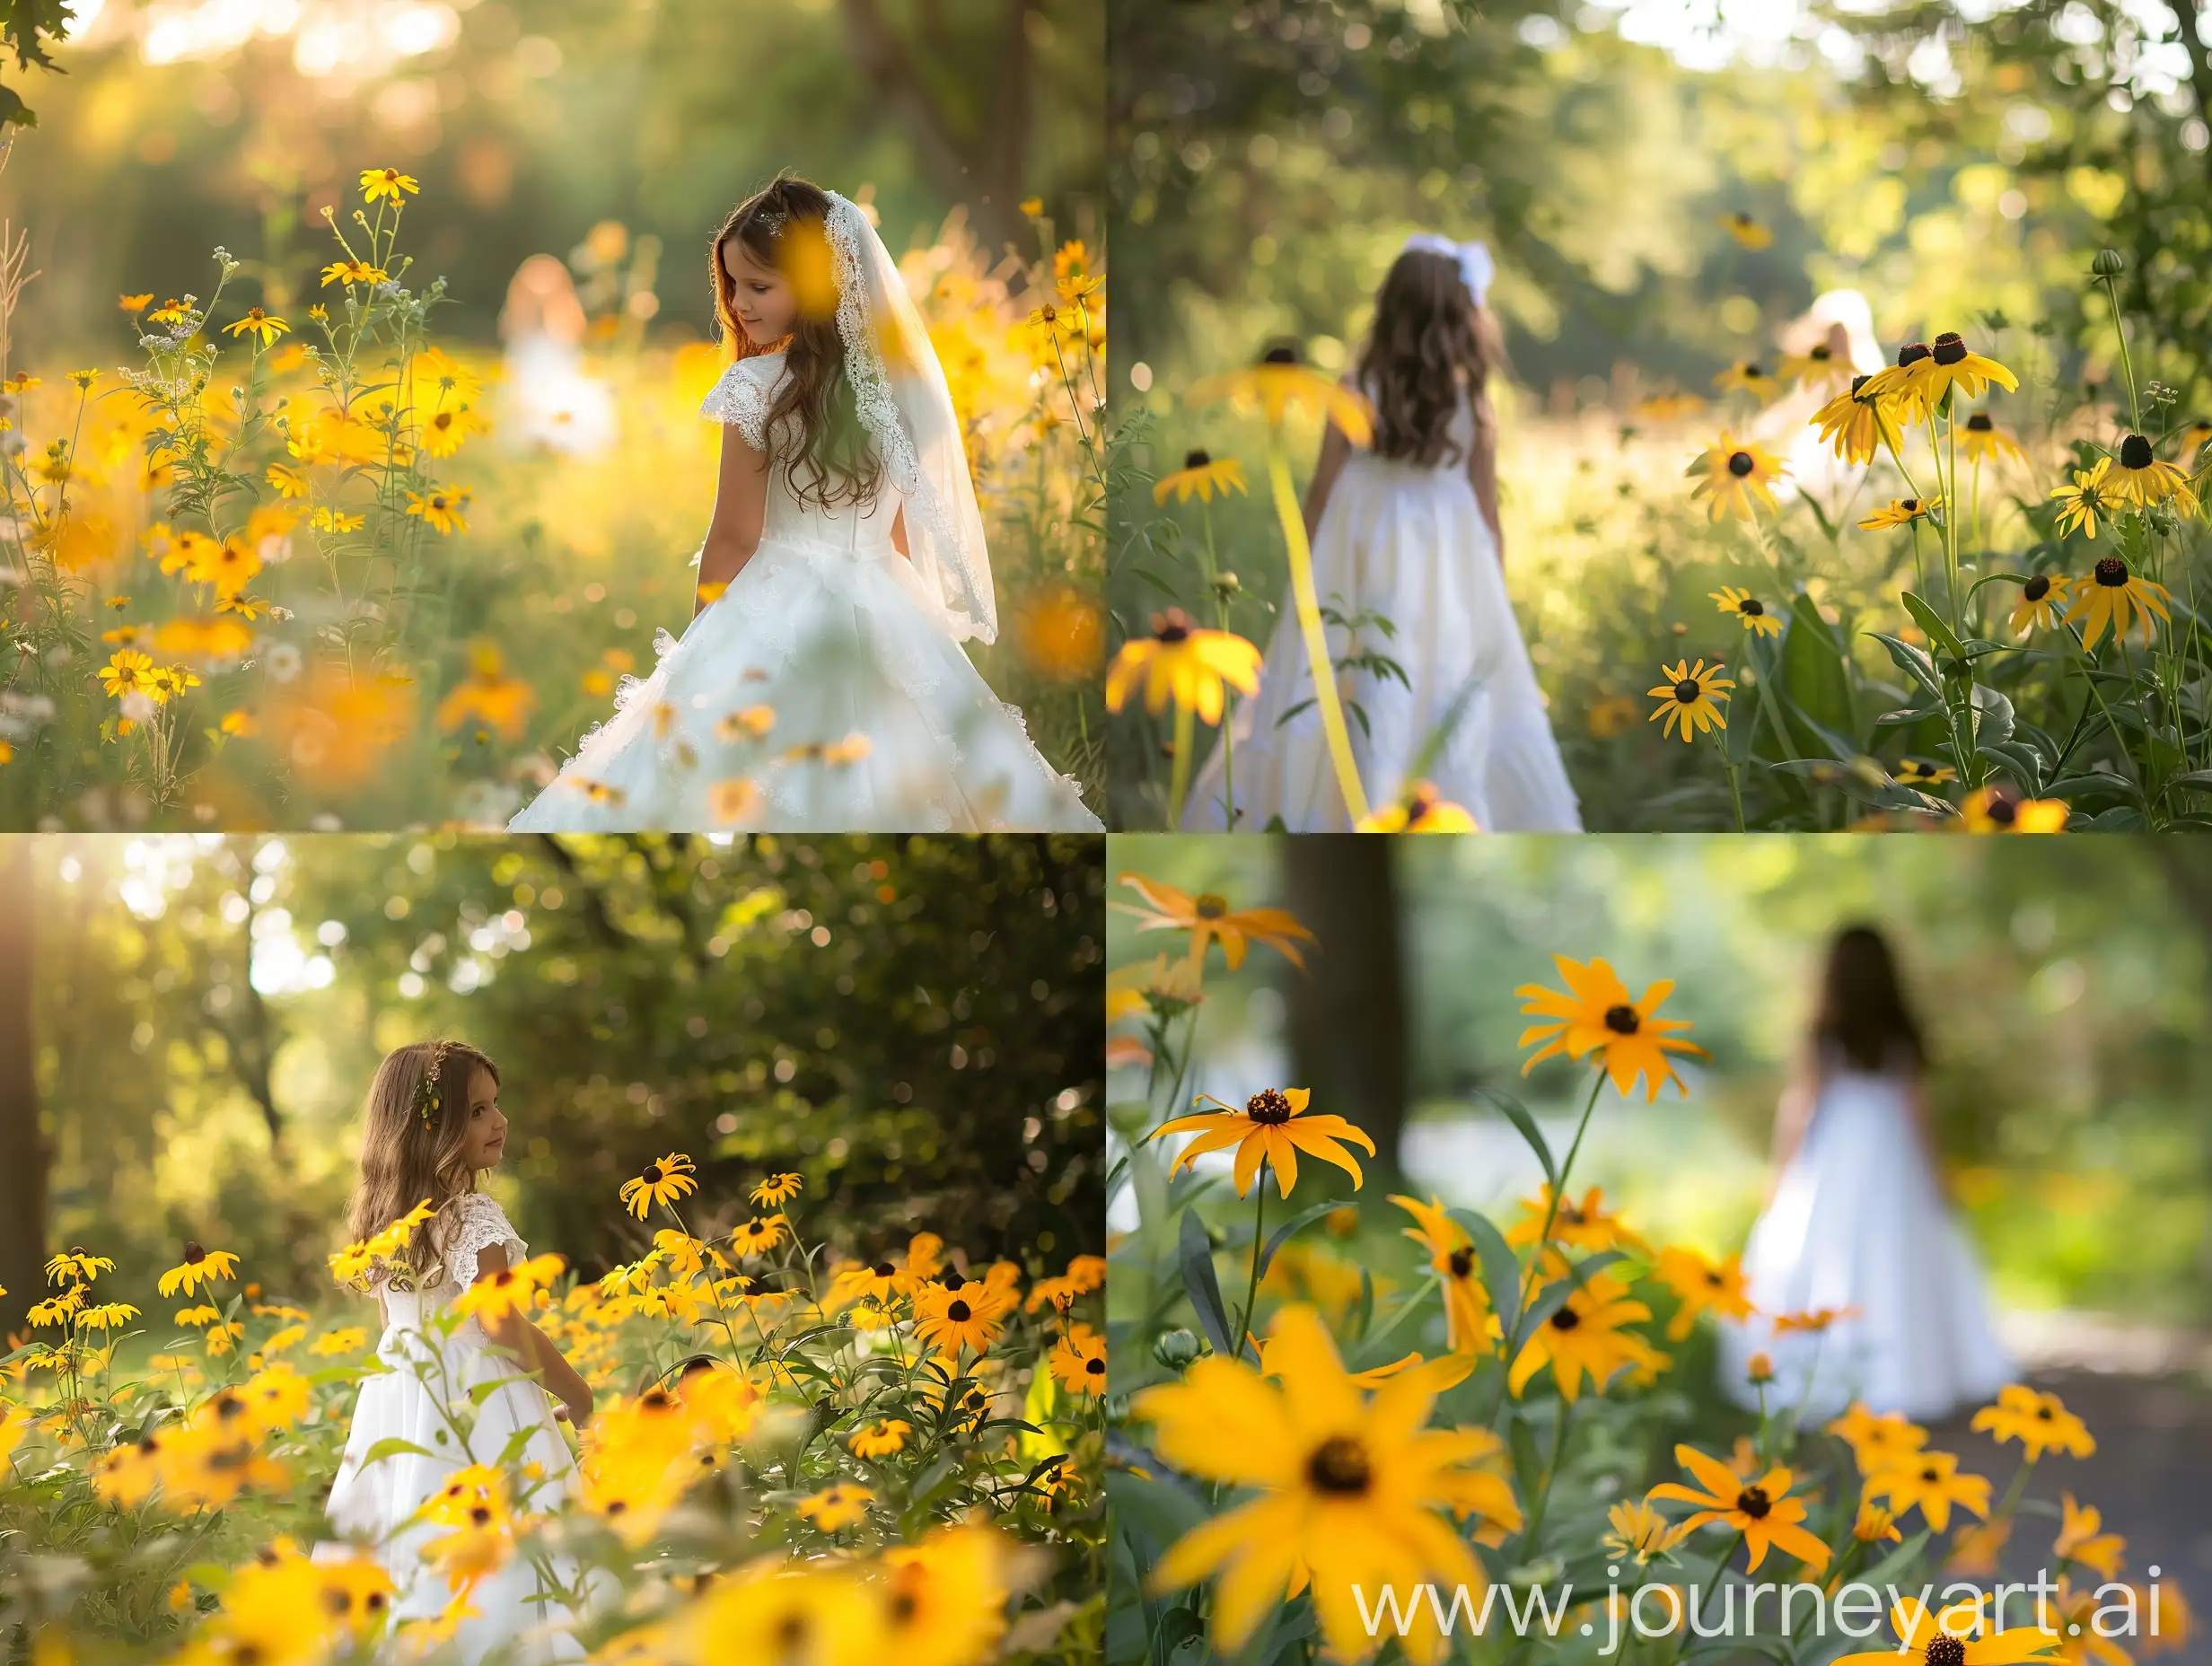 photo session in the park , flower , first communion phots, yellow flowers , girl from the distance in communion dress , 